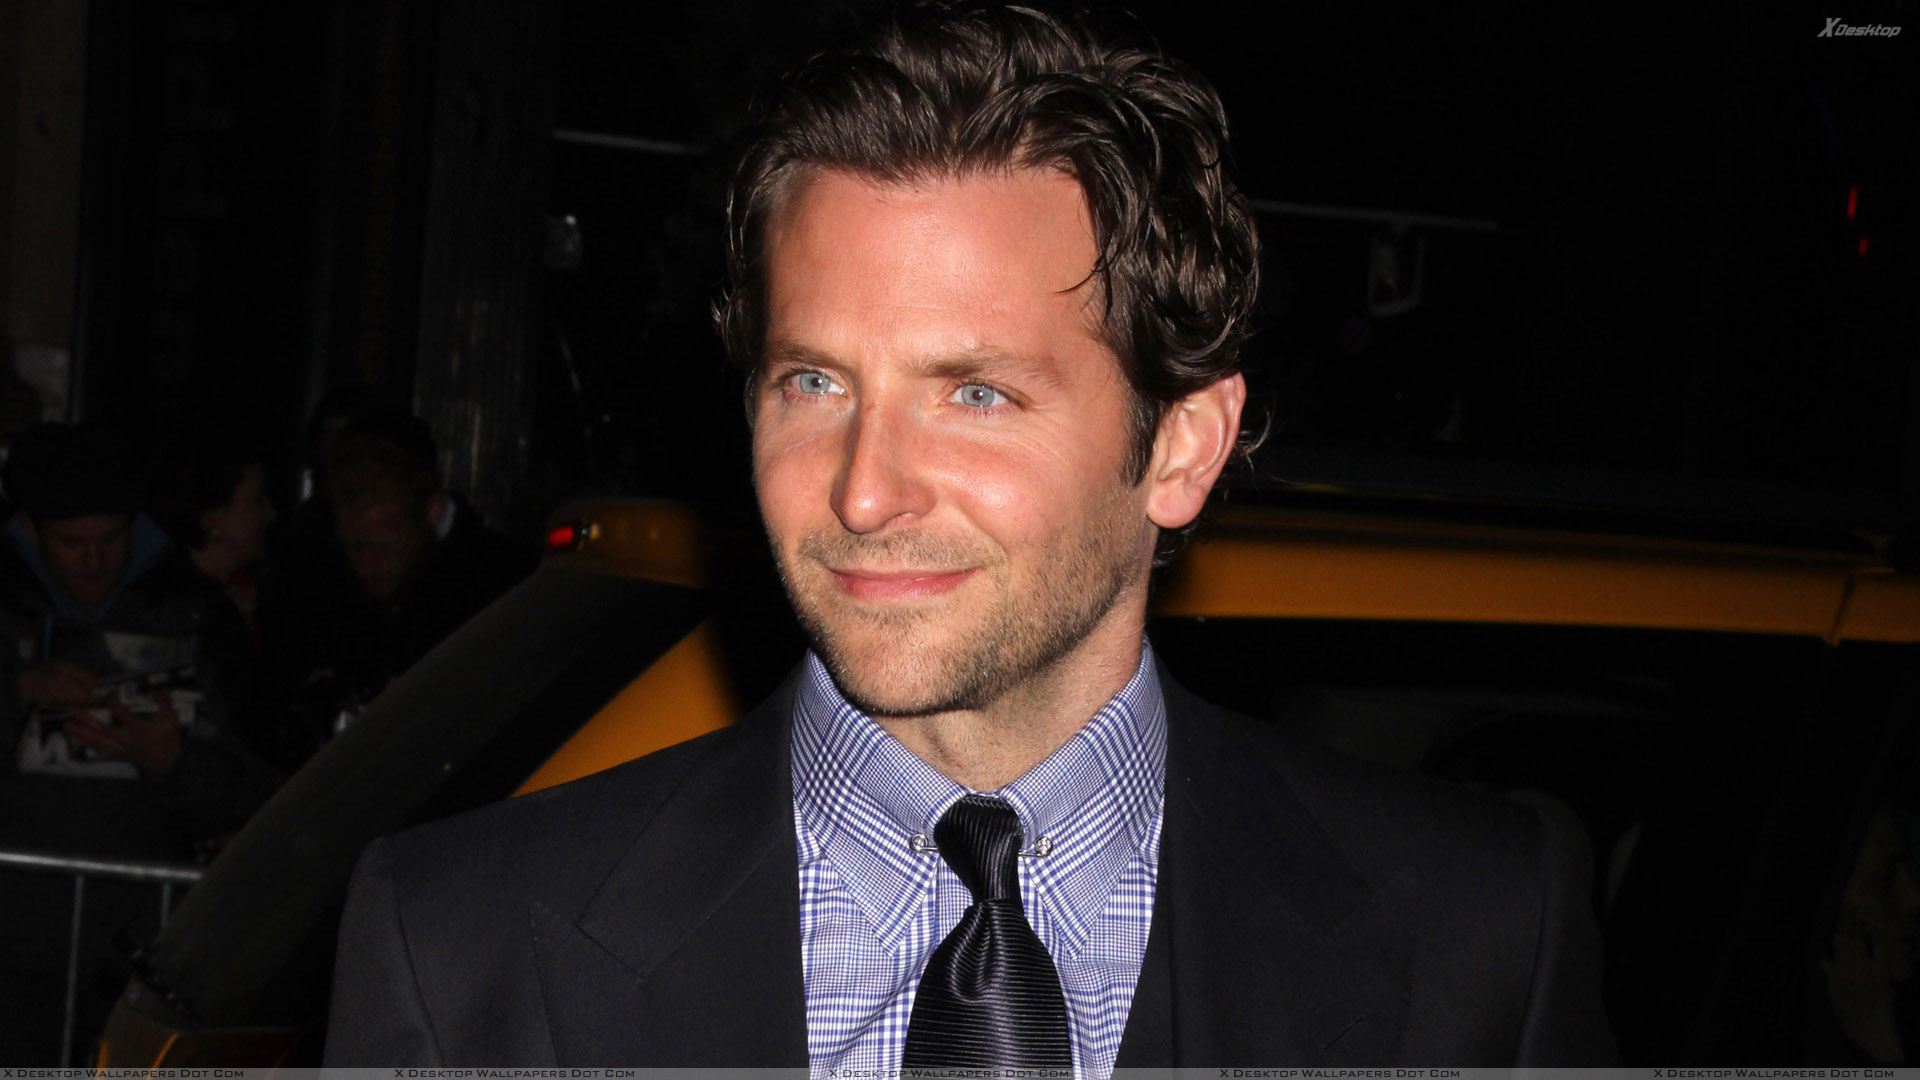 Bradley Cooper Wallpapers High Resolution and Quality Download 1920x1080